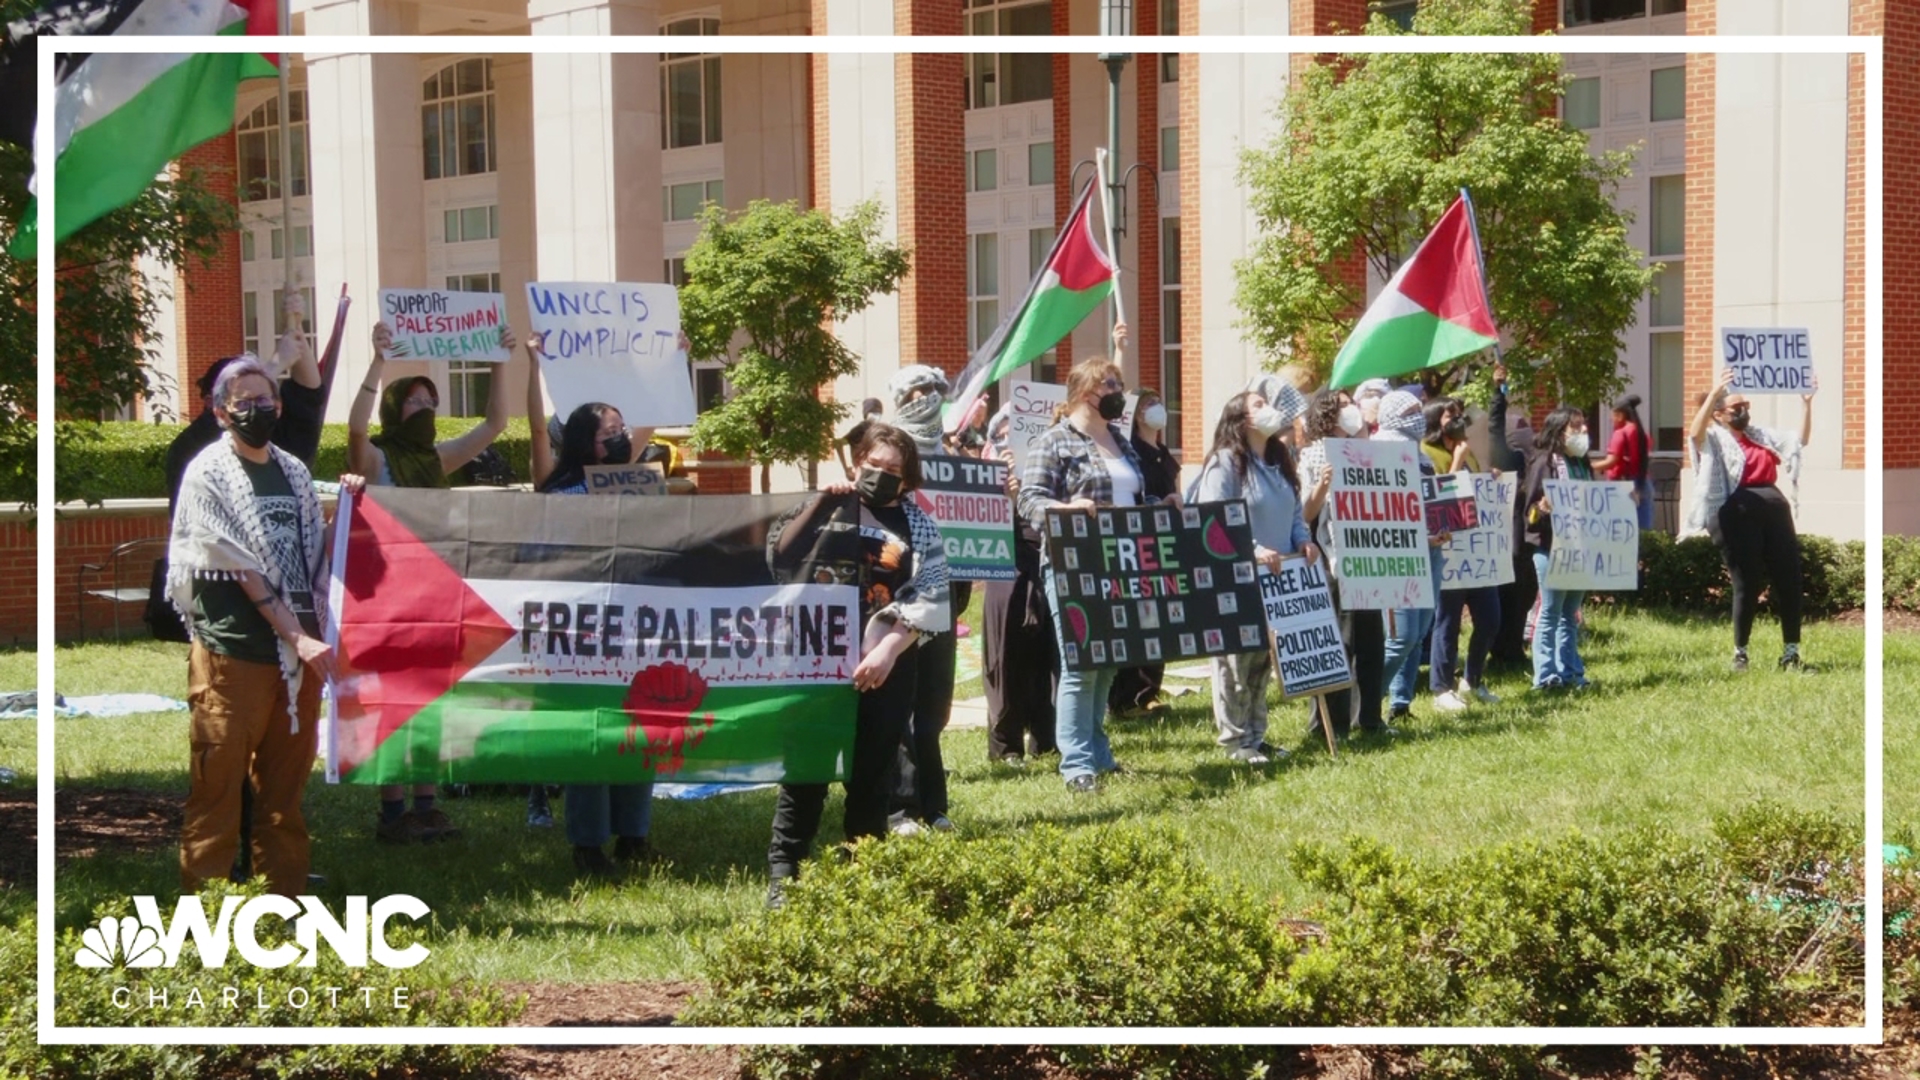 One person was detained when a pro-Palestine encampment at UNC Charlotte was removed on Tuesday, university officials confirmed.